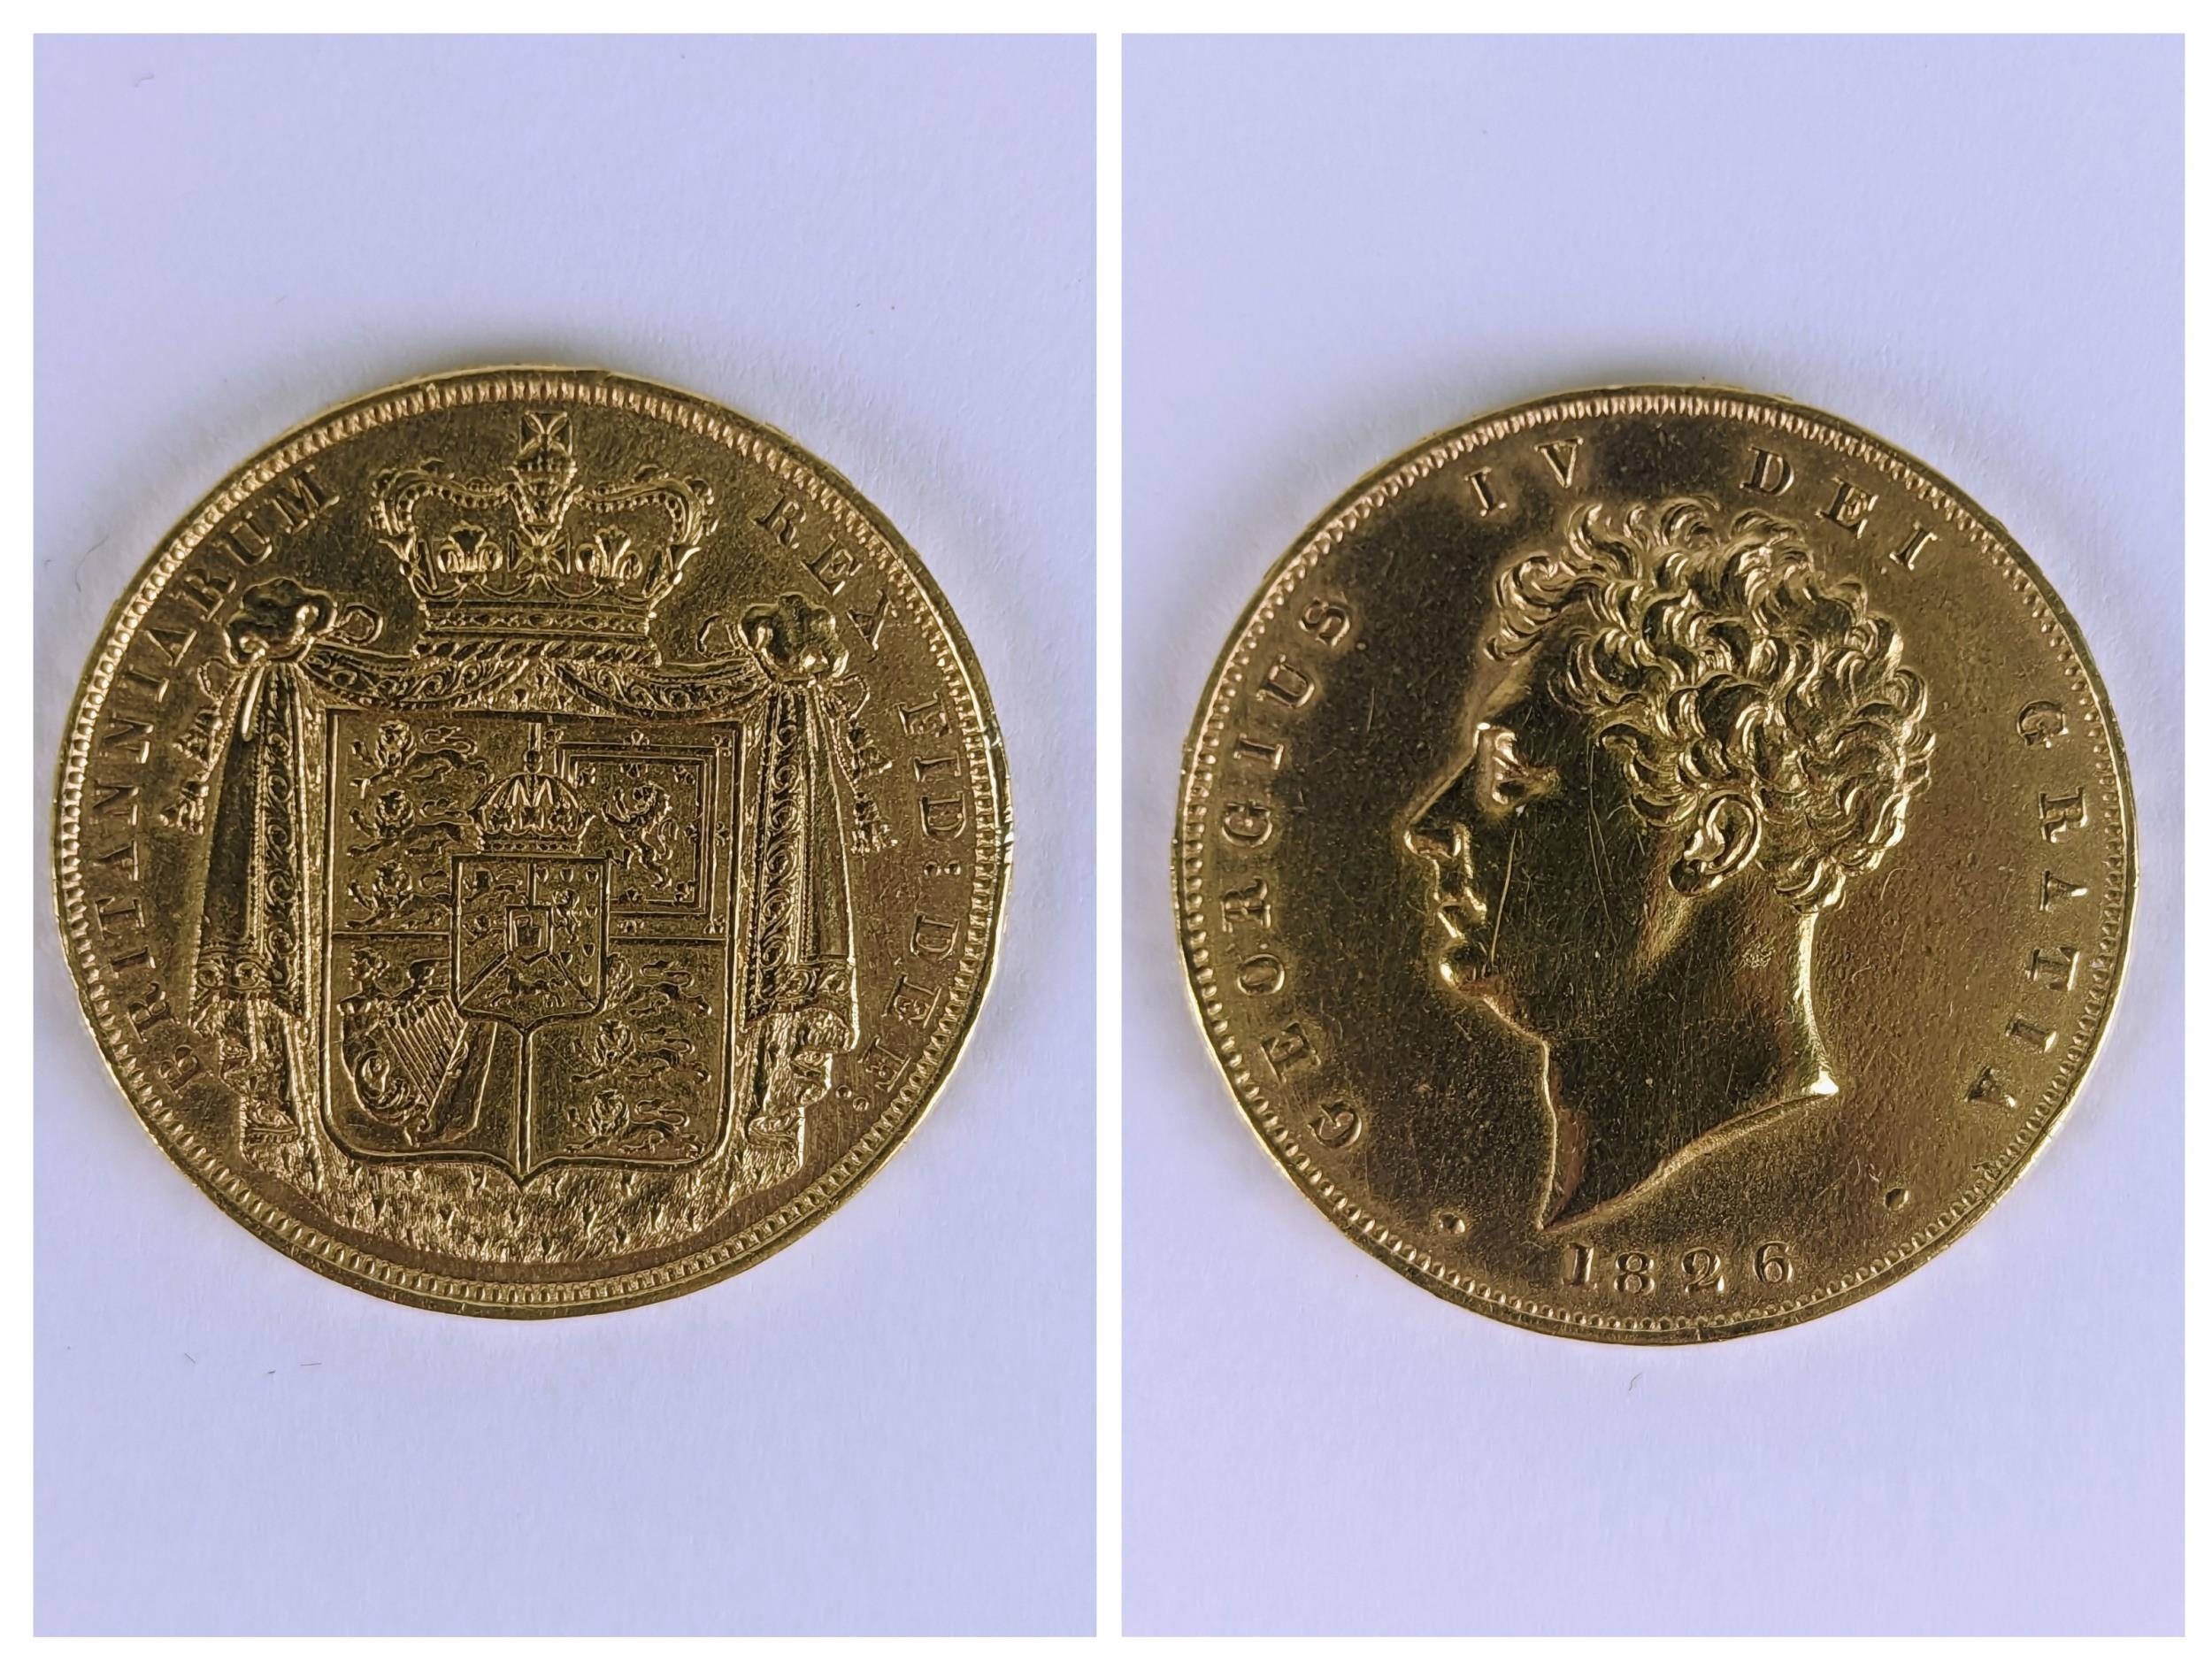 United Kingdom - George IV (1820-1830), proof Two Pounds, dated 1826, uncrowned portrait of King